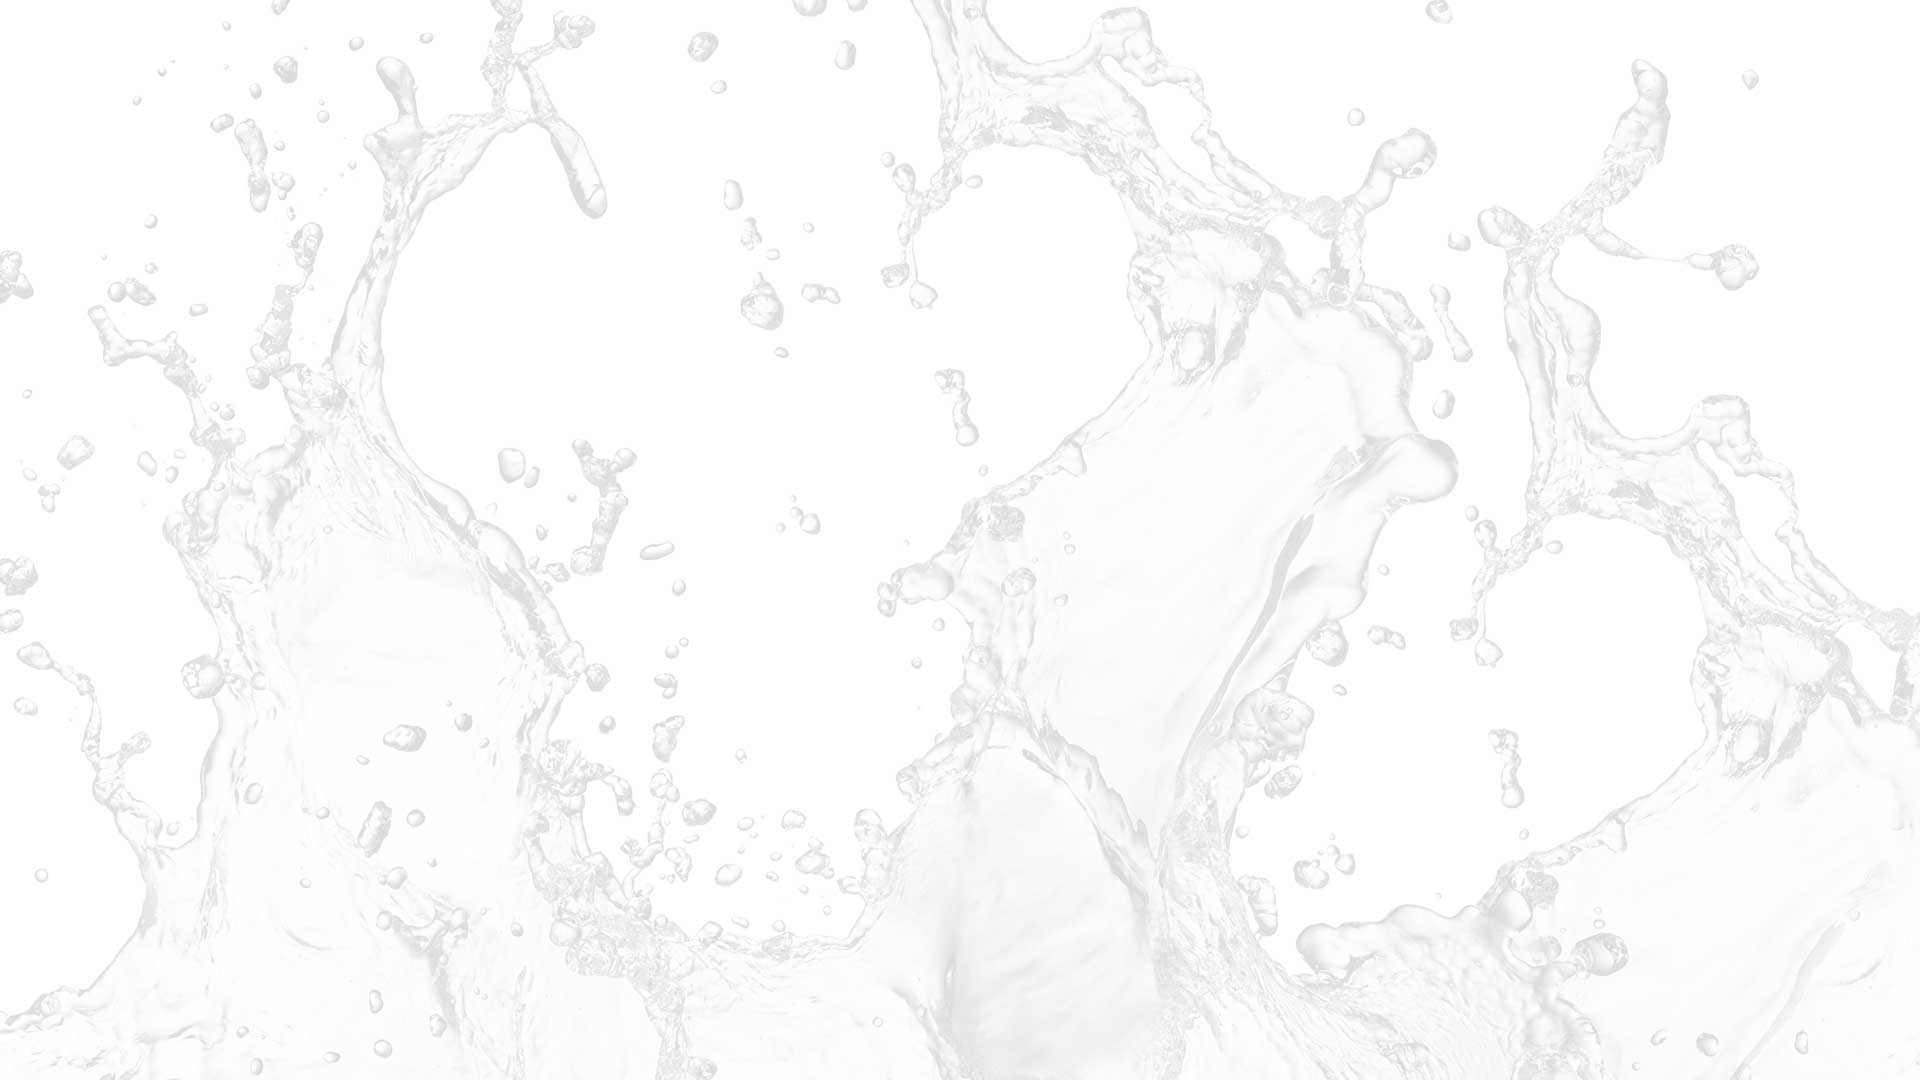 Water Background Image